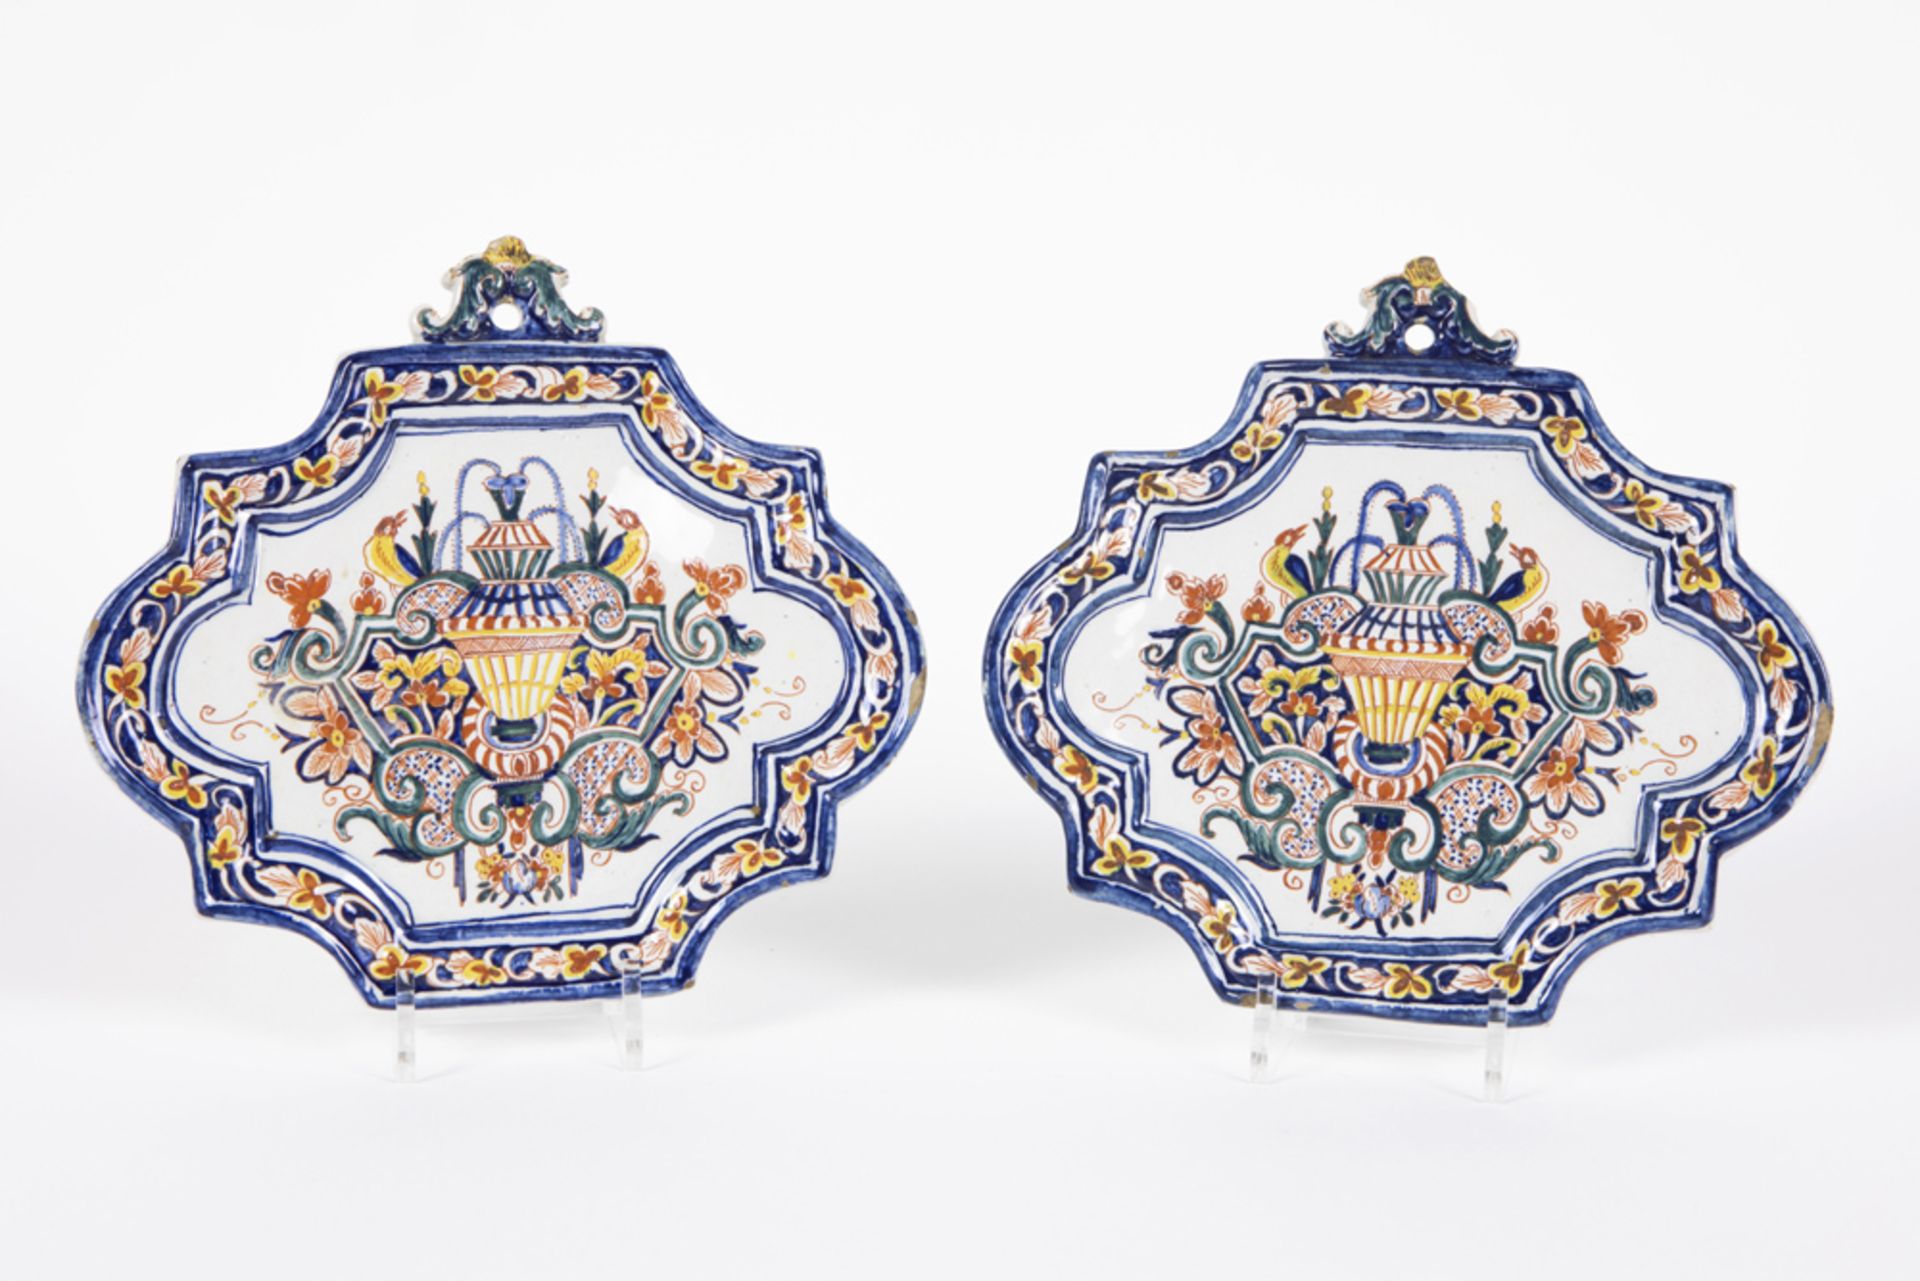 pair of presumably 18th Cent plaques in ceramic from Delft, marked IVRN 1744, with a baroque style